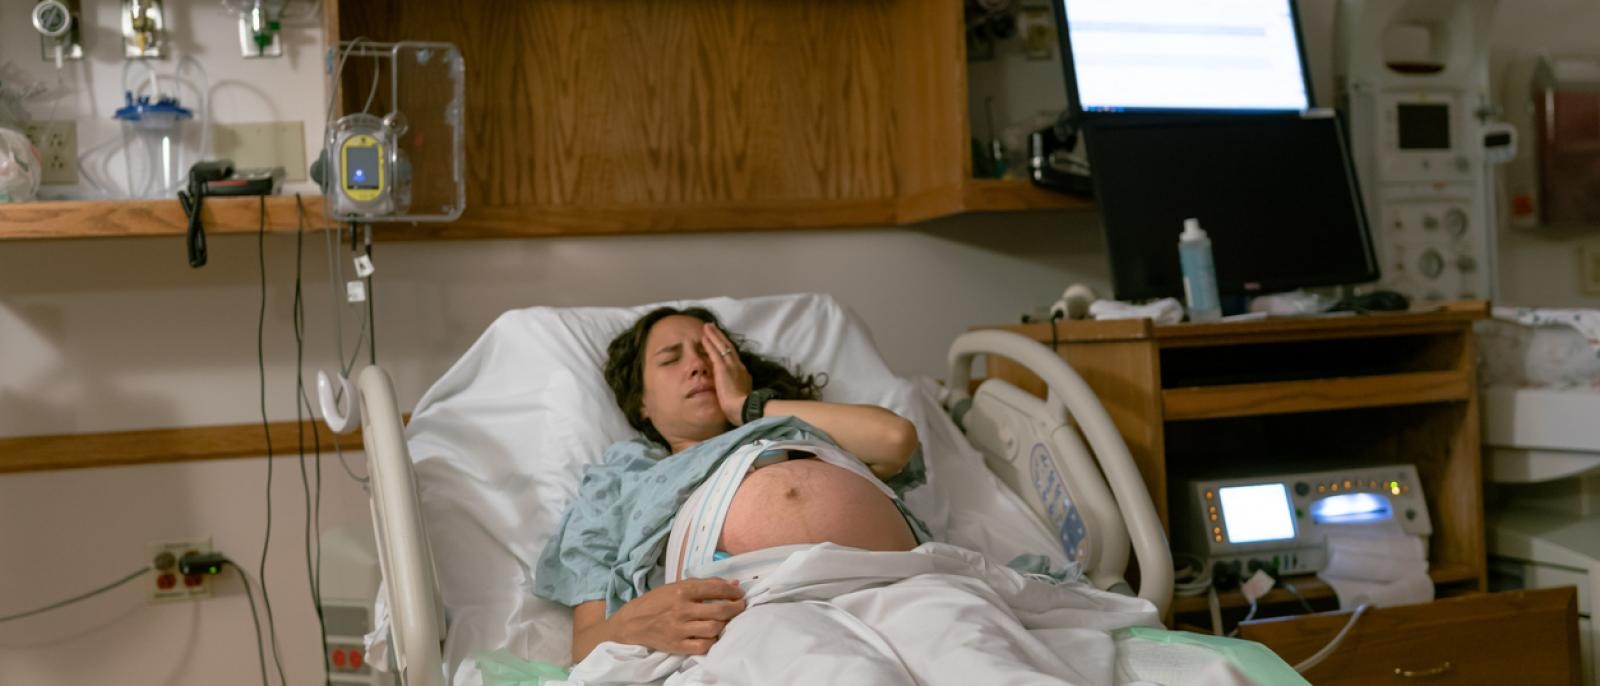 Mistreatment in Childbirth is Common in the U.S. Especially Among the Disadvantaged